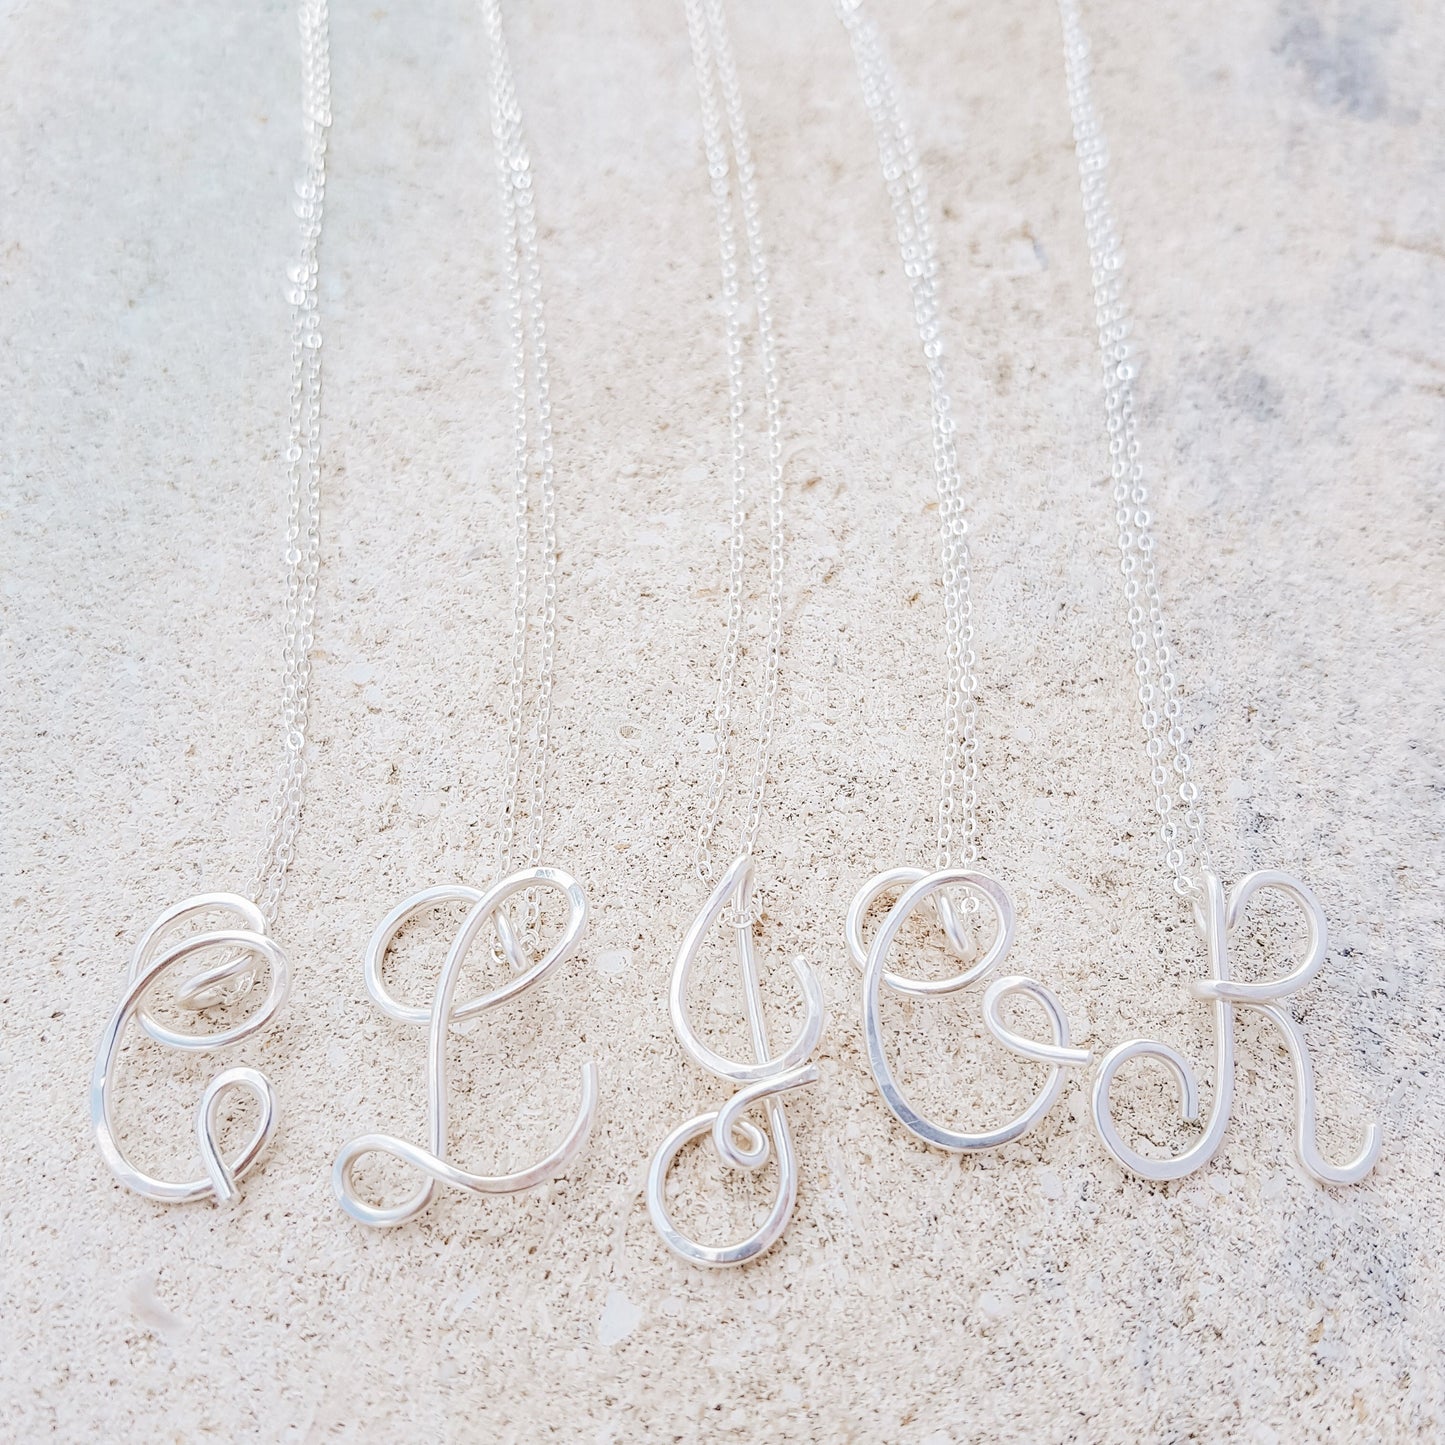 C Custom Letter Necklace • Personalized Name Necklace • C Custom Initials Necklace • Personalized Gift • Mother's Day Gift